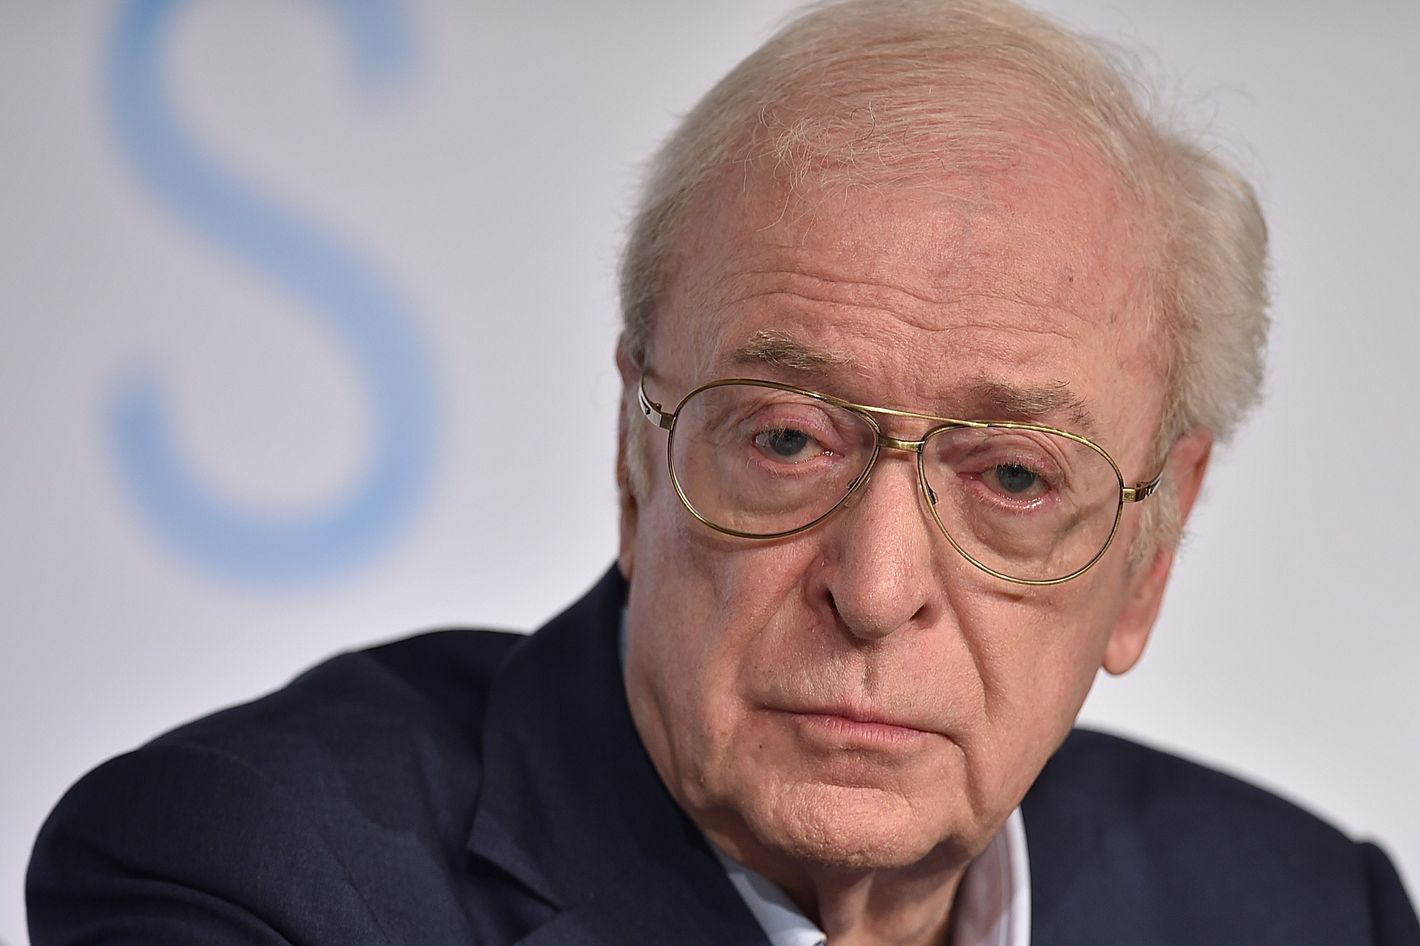 Michael Caine to Young Men: You Will Someday Have My Body